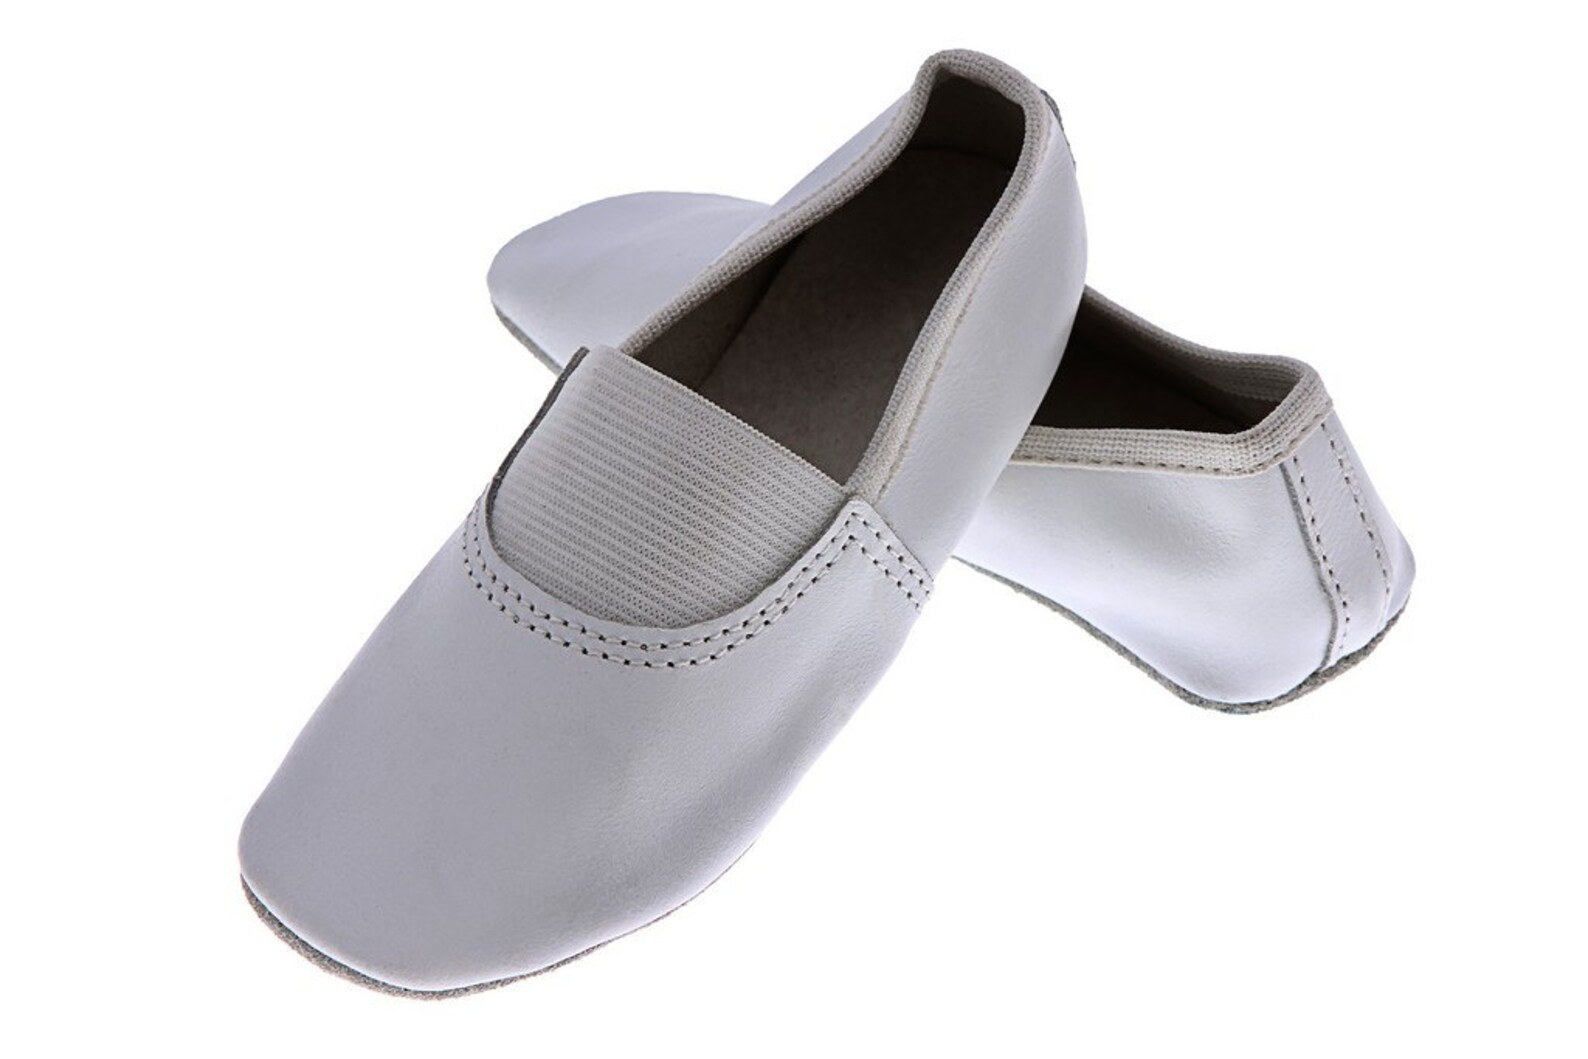 children boys girls leather full sole flats ballet dance slippers cheshky popular gym shoes leather pumps black white sizes supp